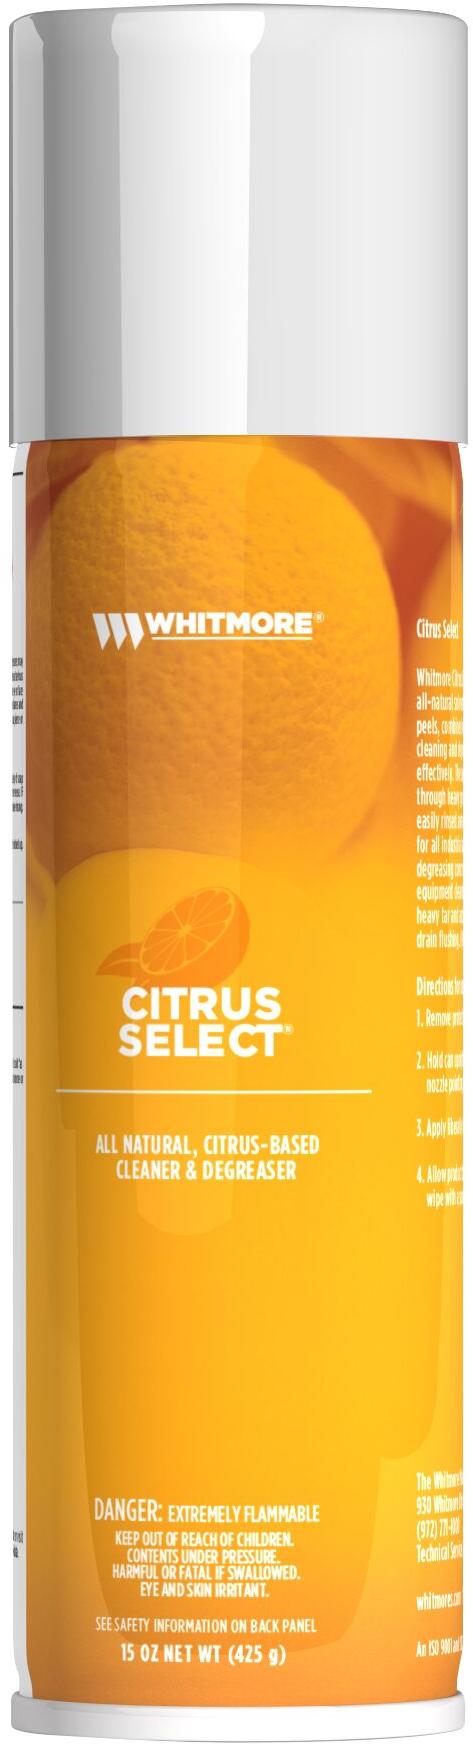 Citrus Select cleaner